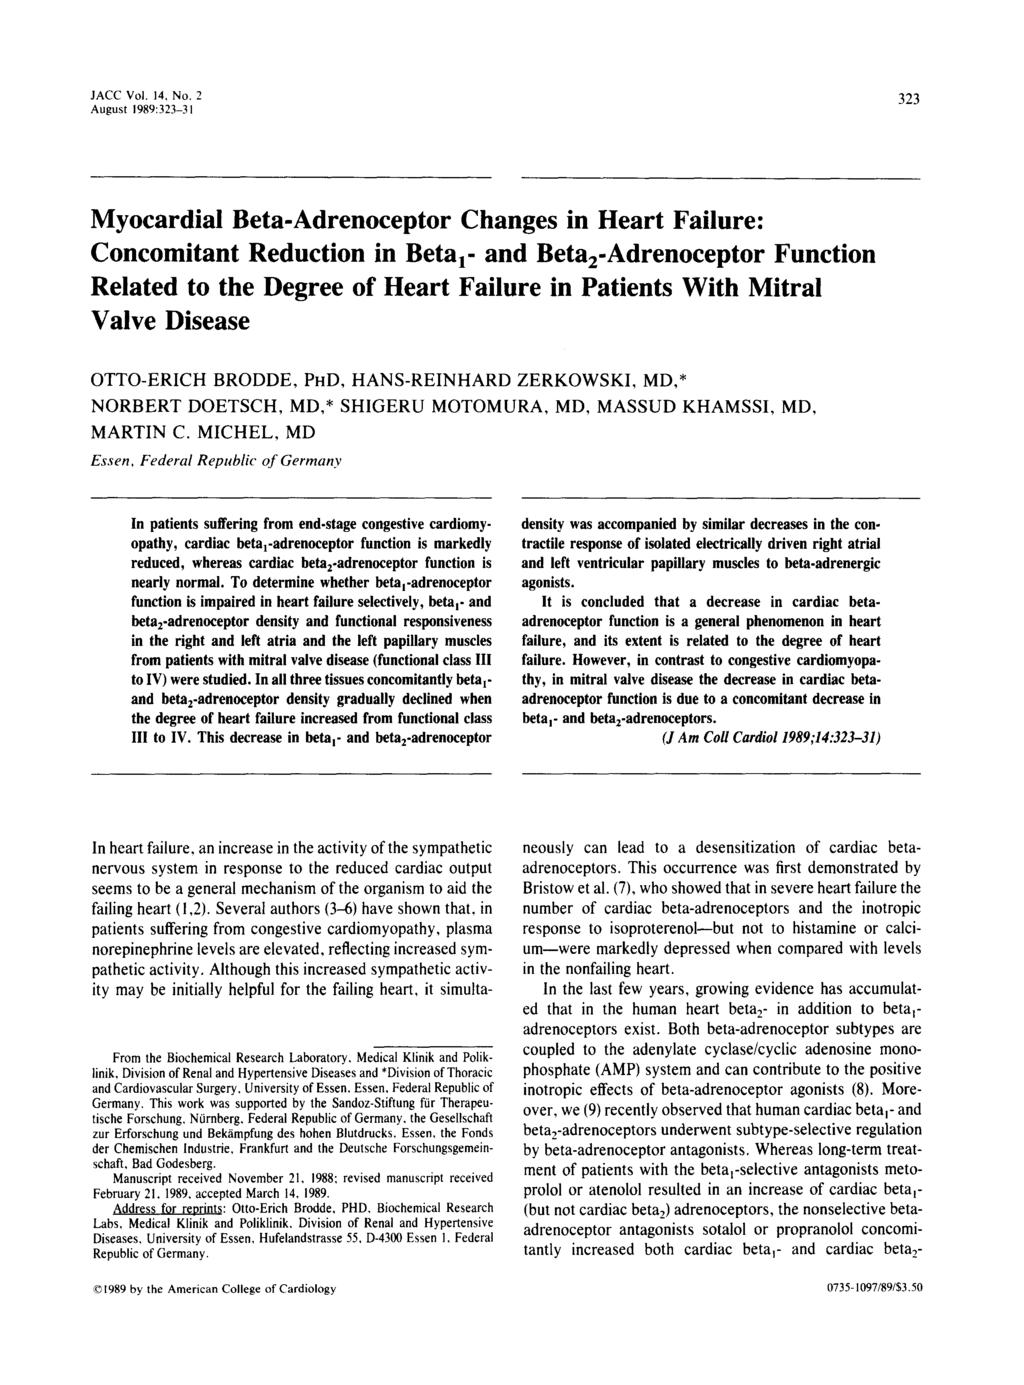 August 1989 : 3 3-31 3 3 Myocardial Beta-Adrenoceptor Changes in Heart Failure : Concomitant Reduction in Beta,- and Beta -Adrenoceptor Function Related to the Degree of Heart Failure in Patients